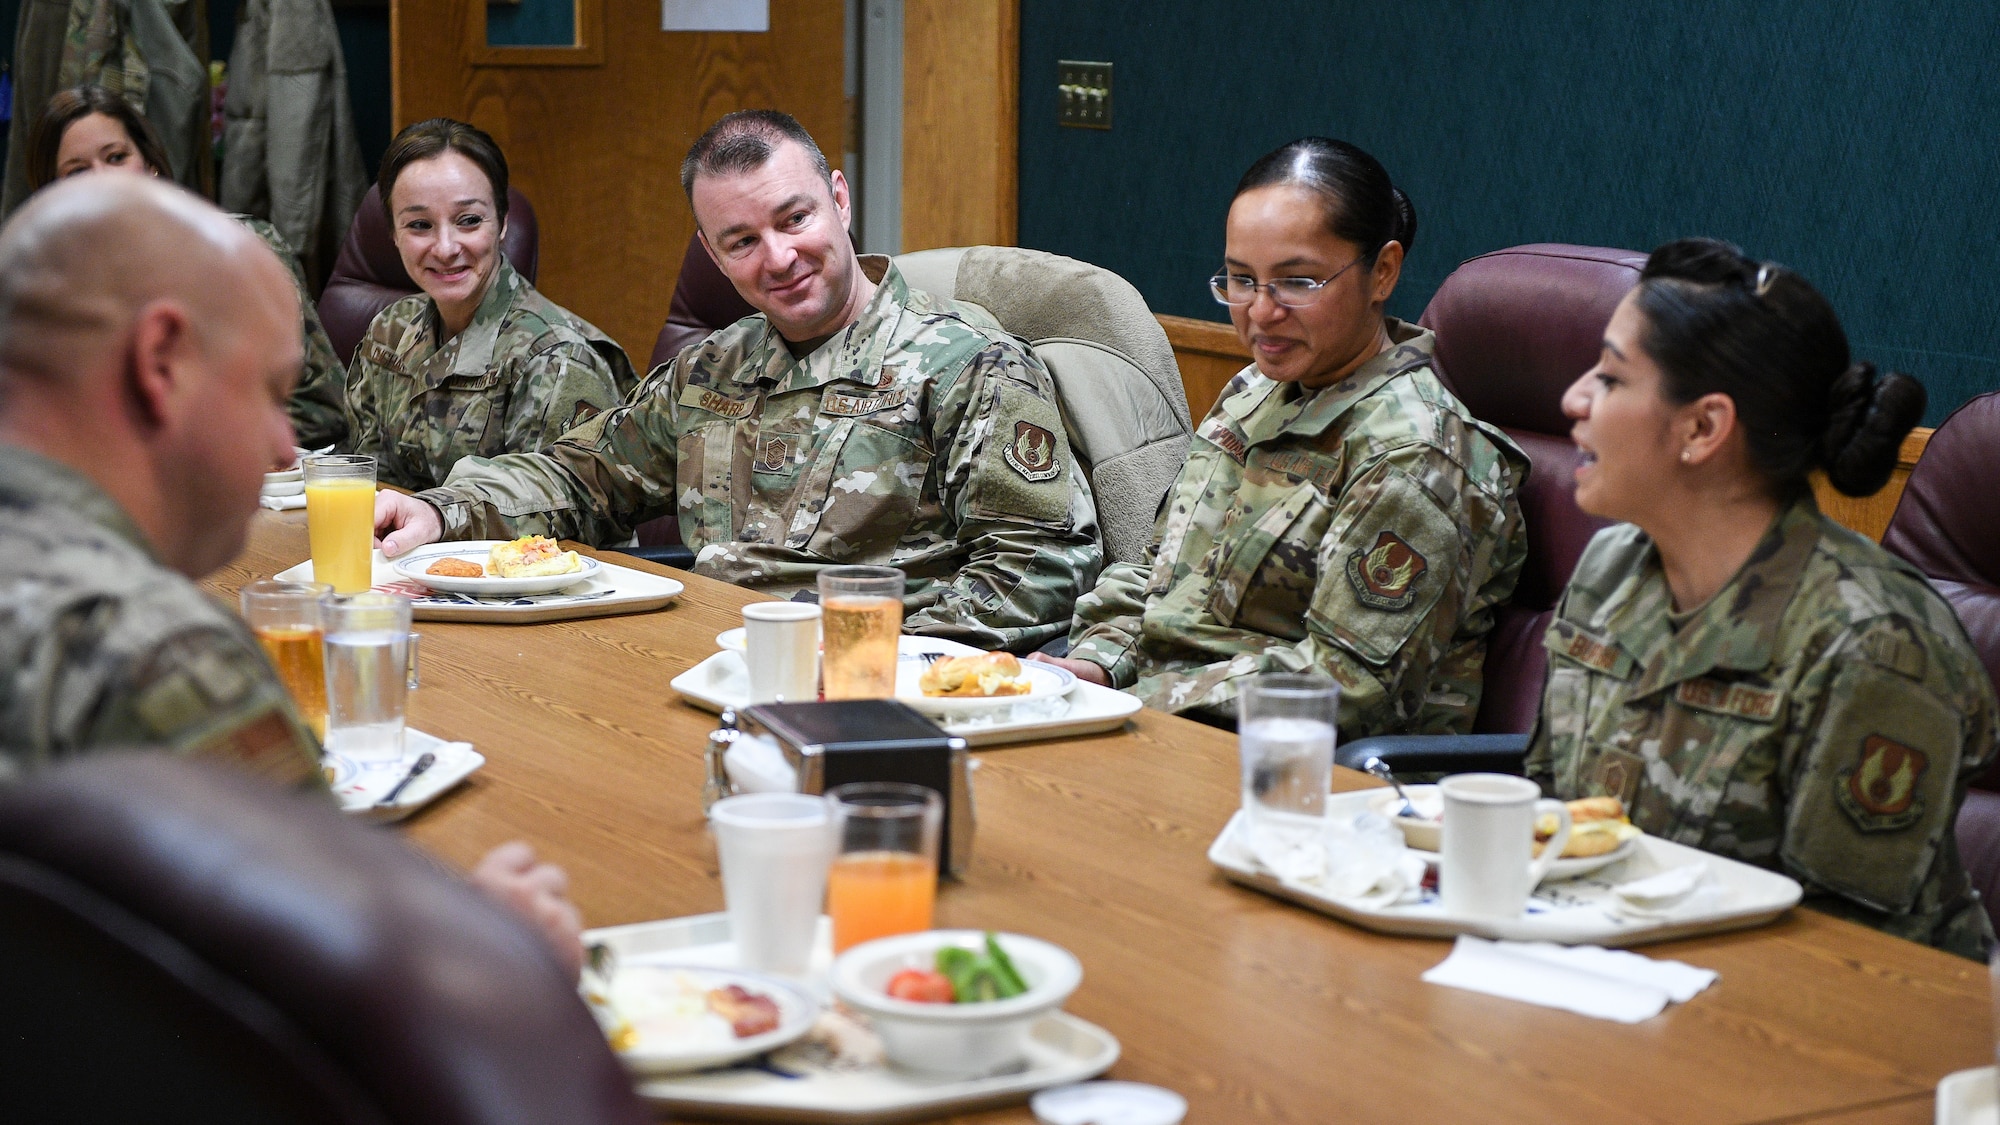 Chief Sharp, AFSC command chief, sits at a table with other Airmen at a table while they eat breakfast.